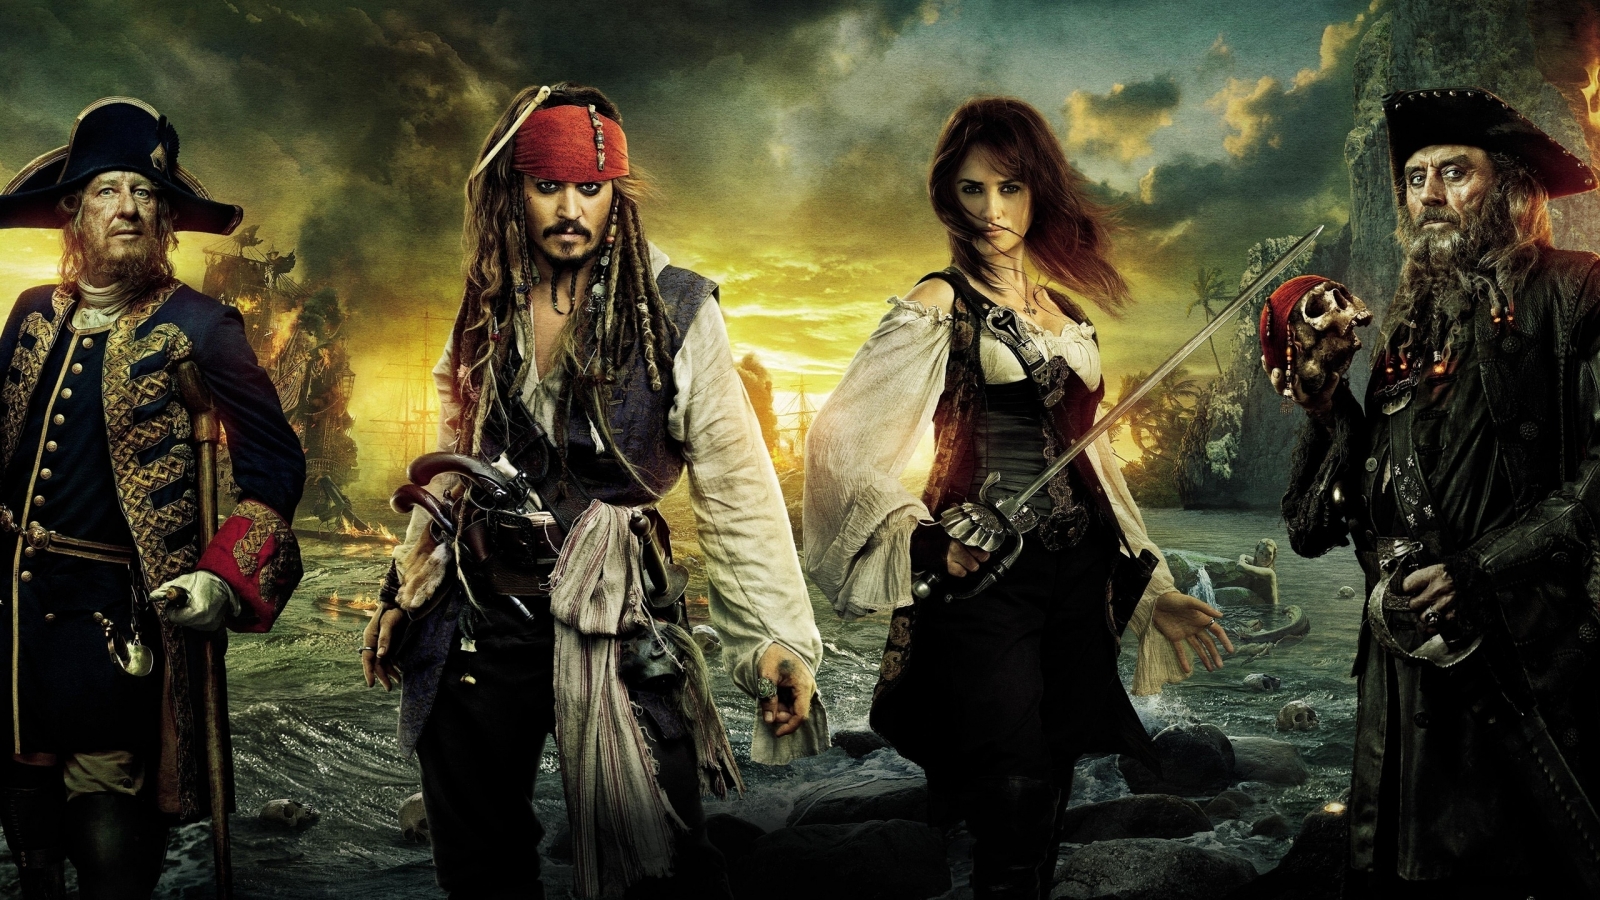 Pirates of the Caribbean Characters for 1600 x 900 HDTV resolution